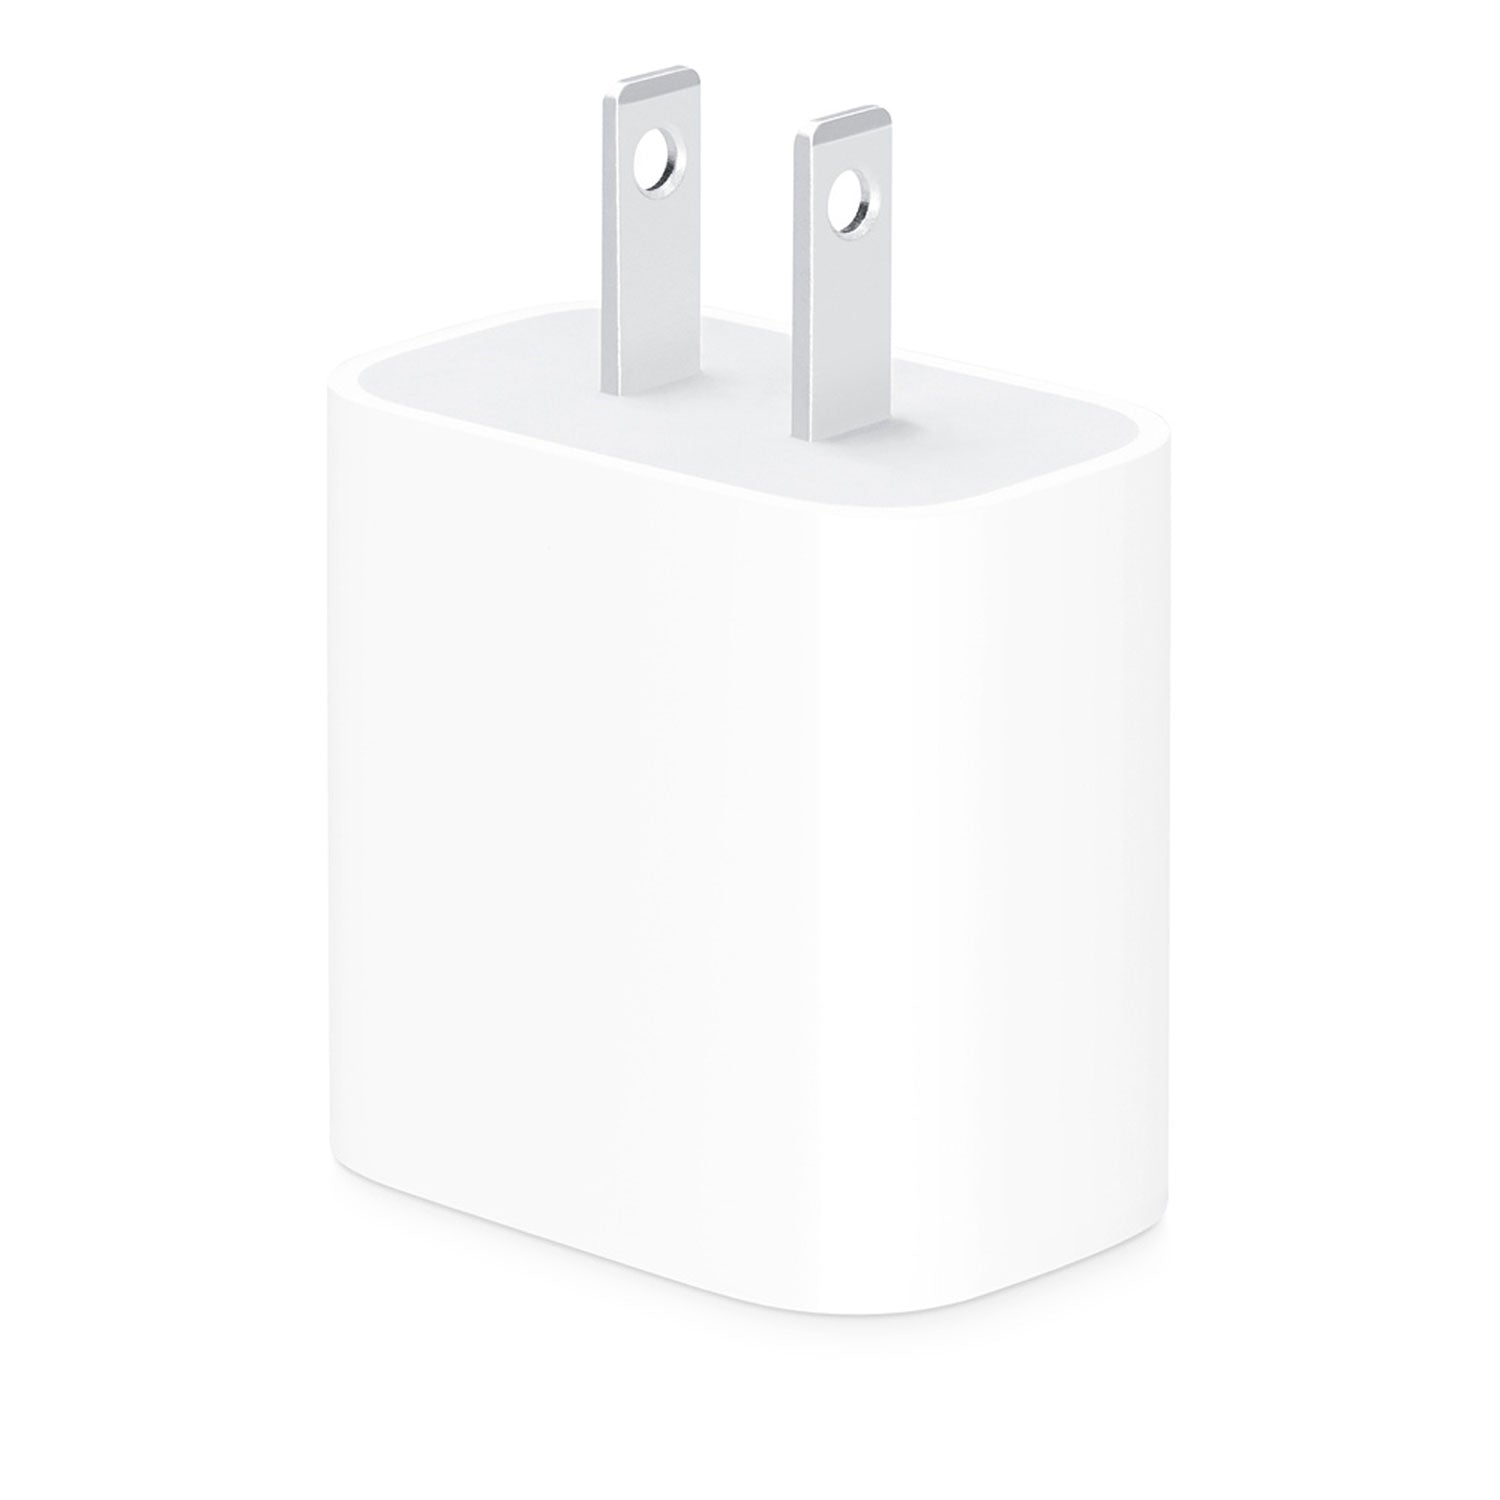 replacement of iPhone USB C Power adapter